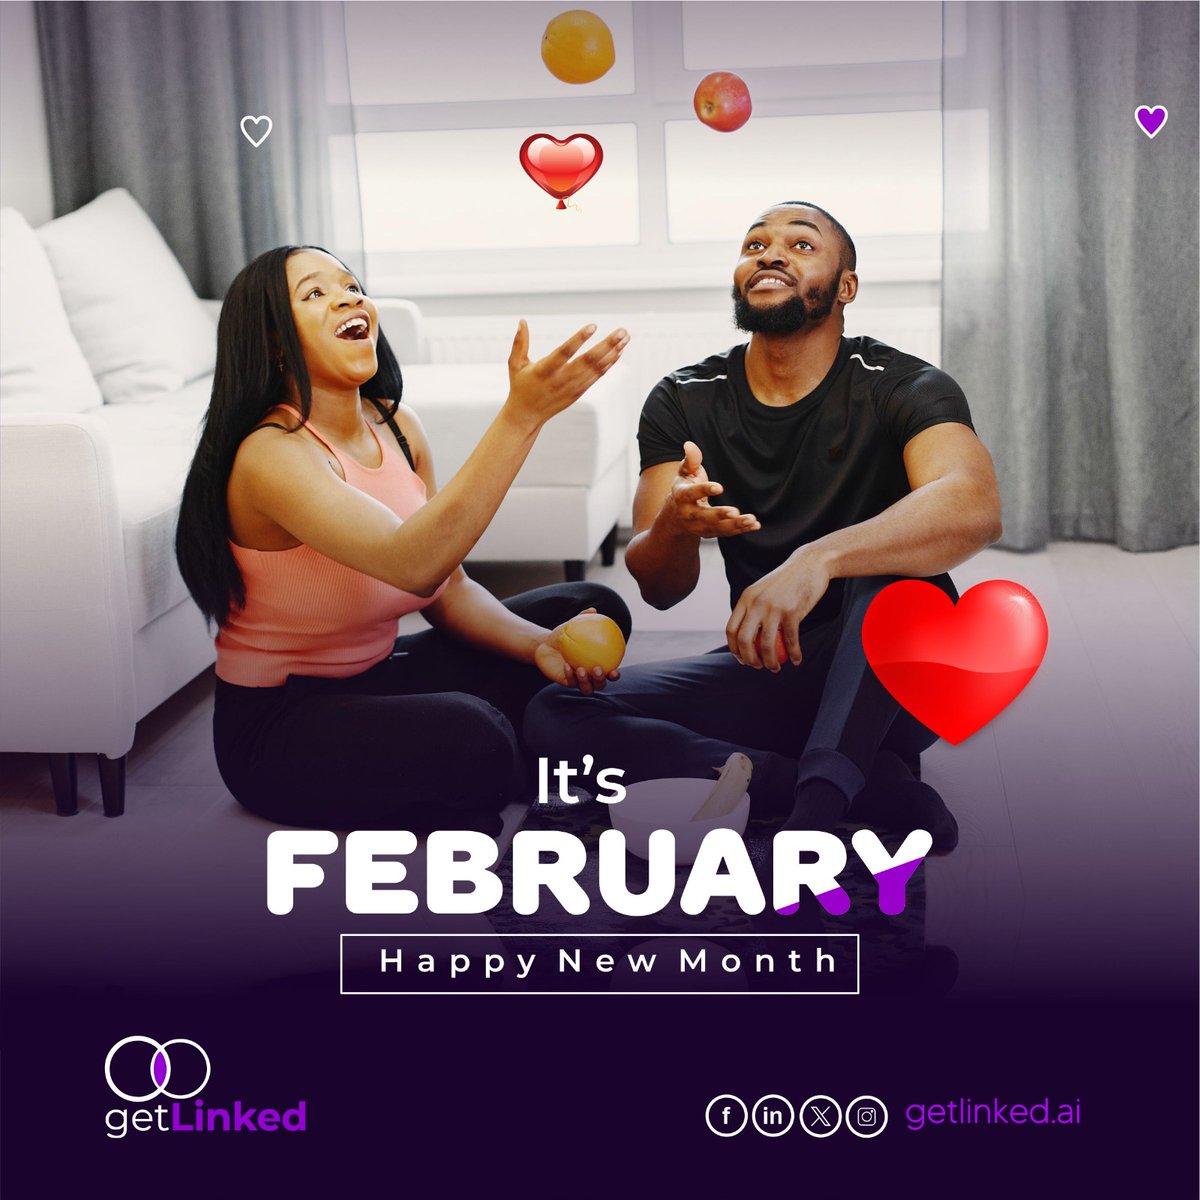 Hello February! 💕 This month, let's focus on building meaningful connections and achieving new milestones with GetLinked.ai. #NewMonth #FebruaryGoals #GetLinked